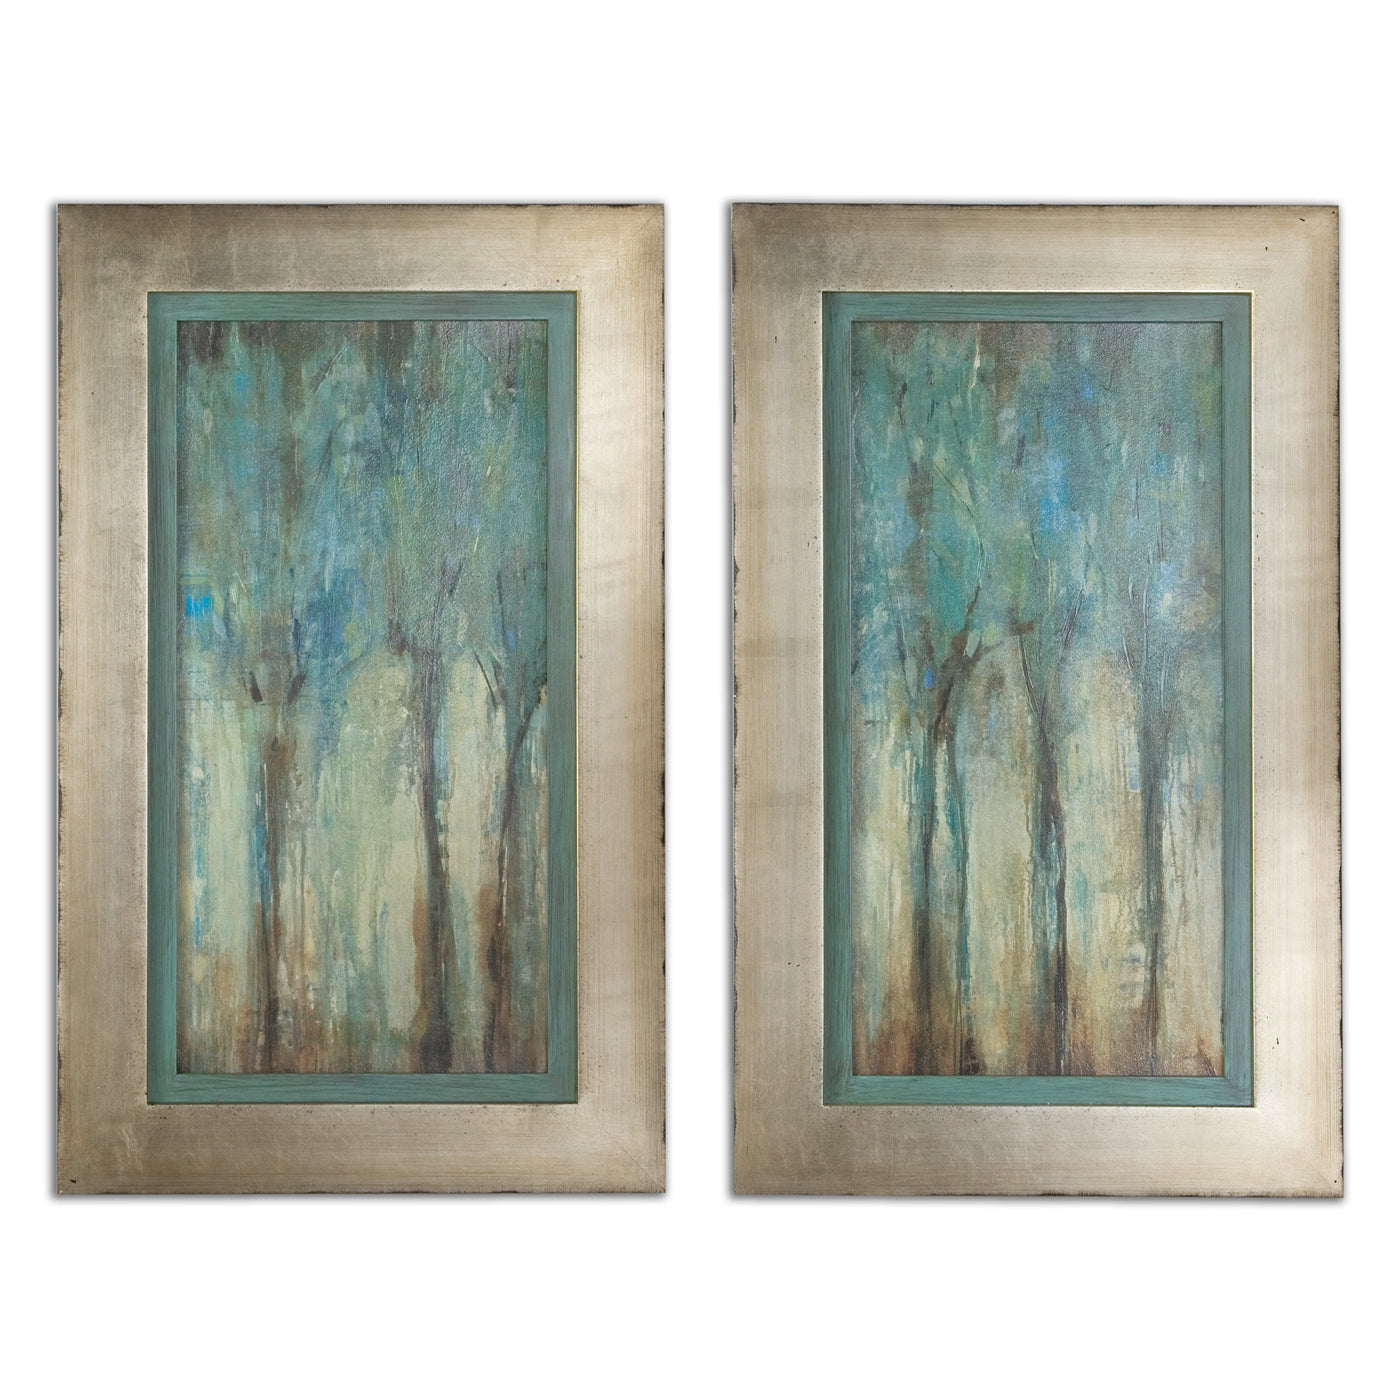 These Modern, Oil Reproduction Landscapes Feature A Hand Applied, Dabbed Finish. Muted Shades Of Blue, Green, And Beige Cr...